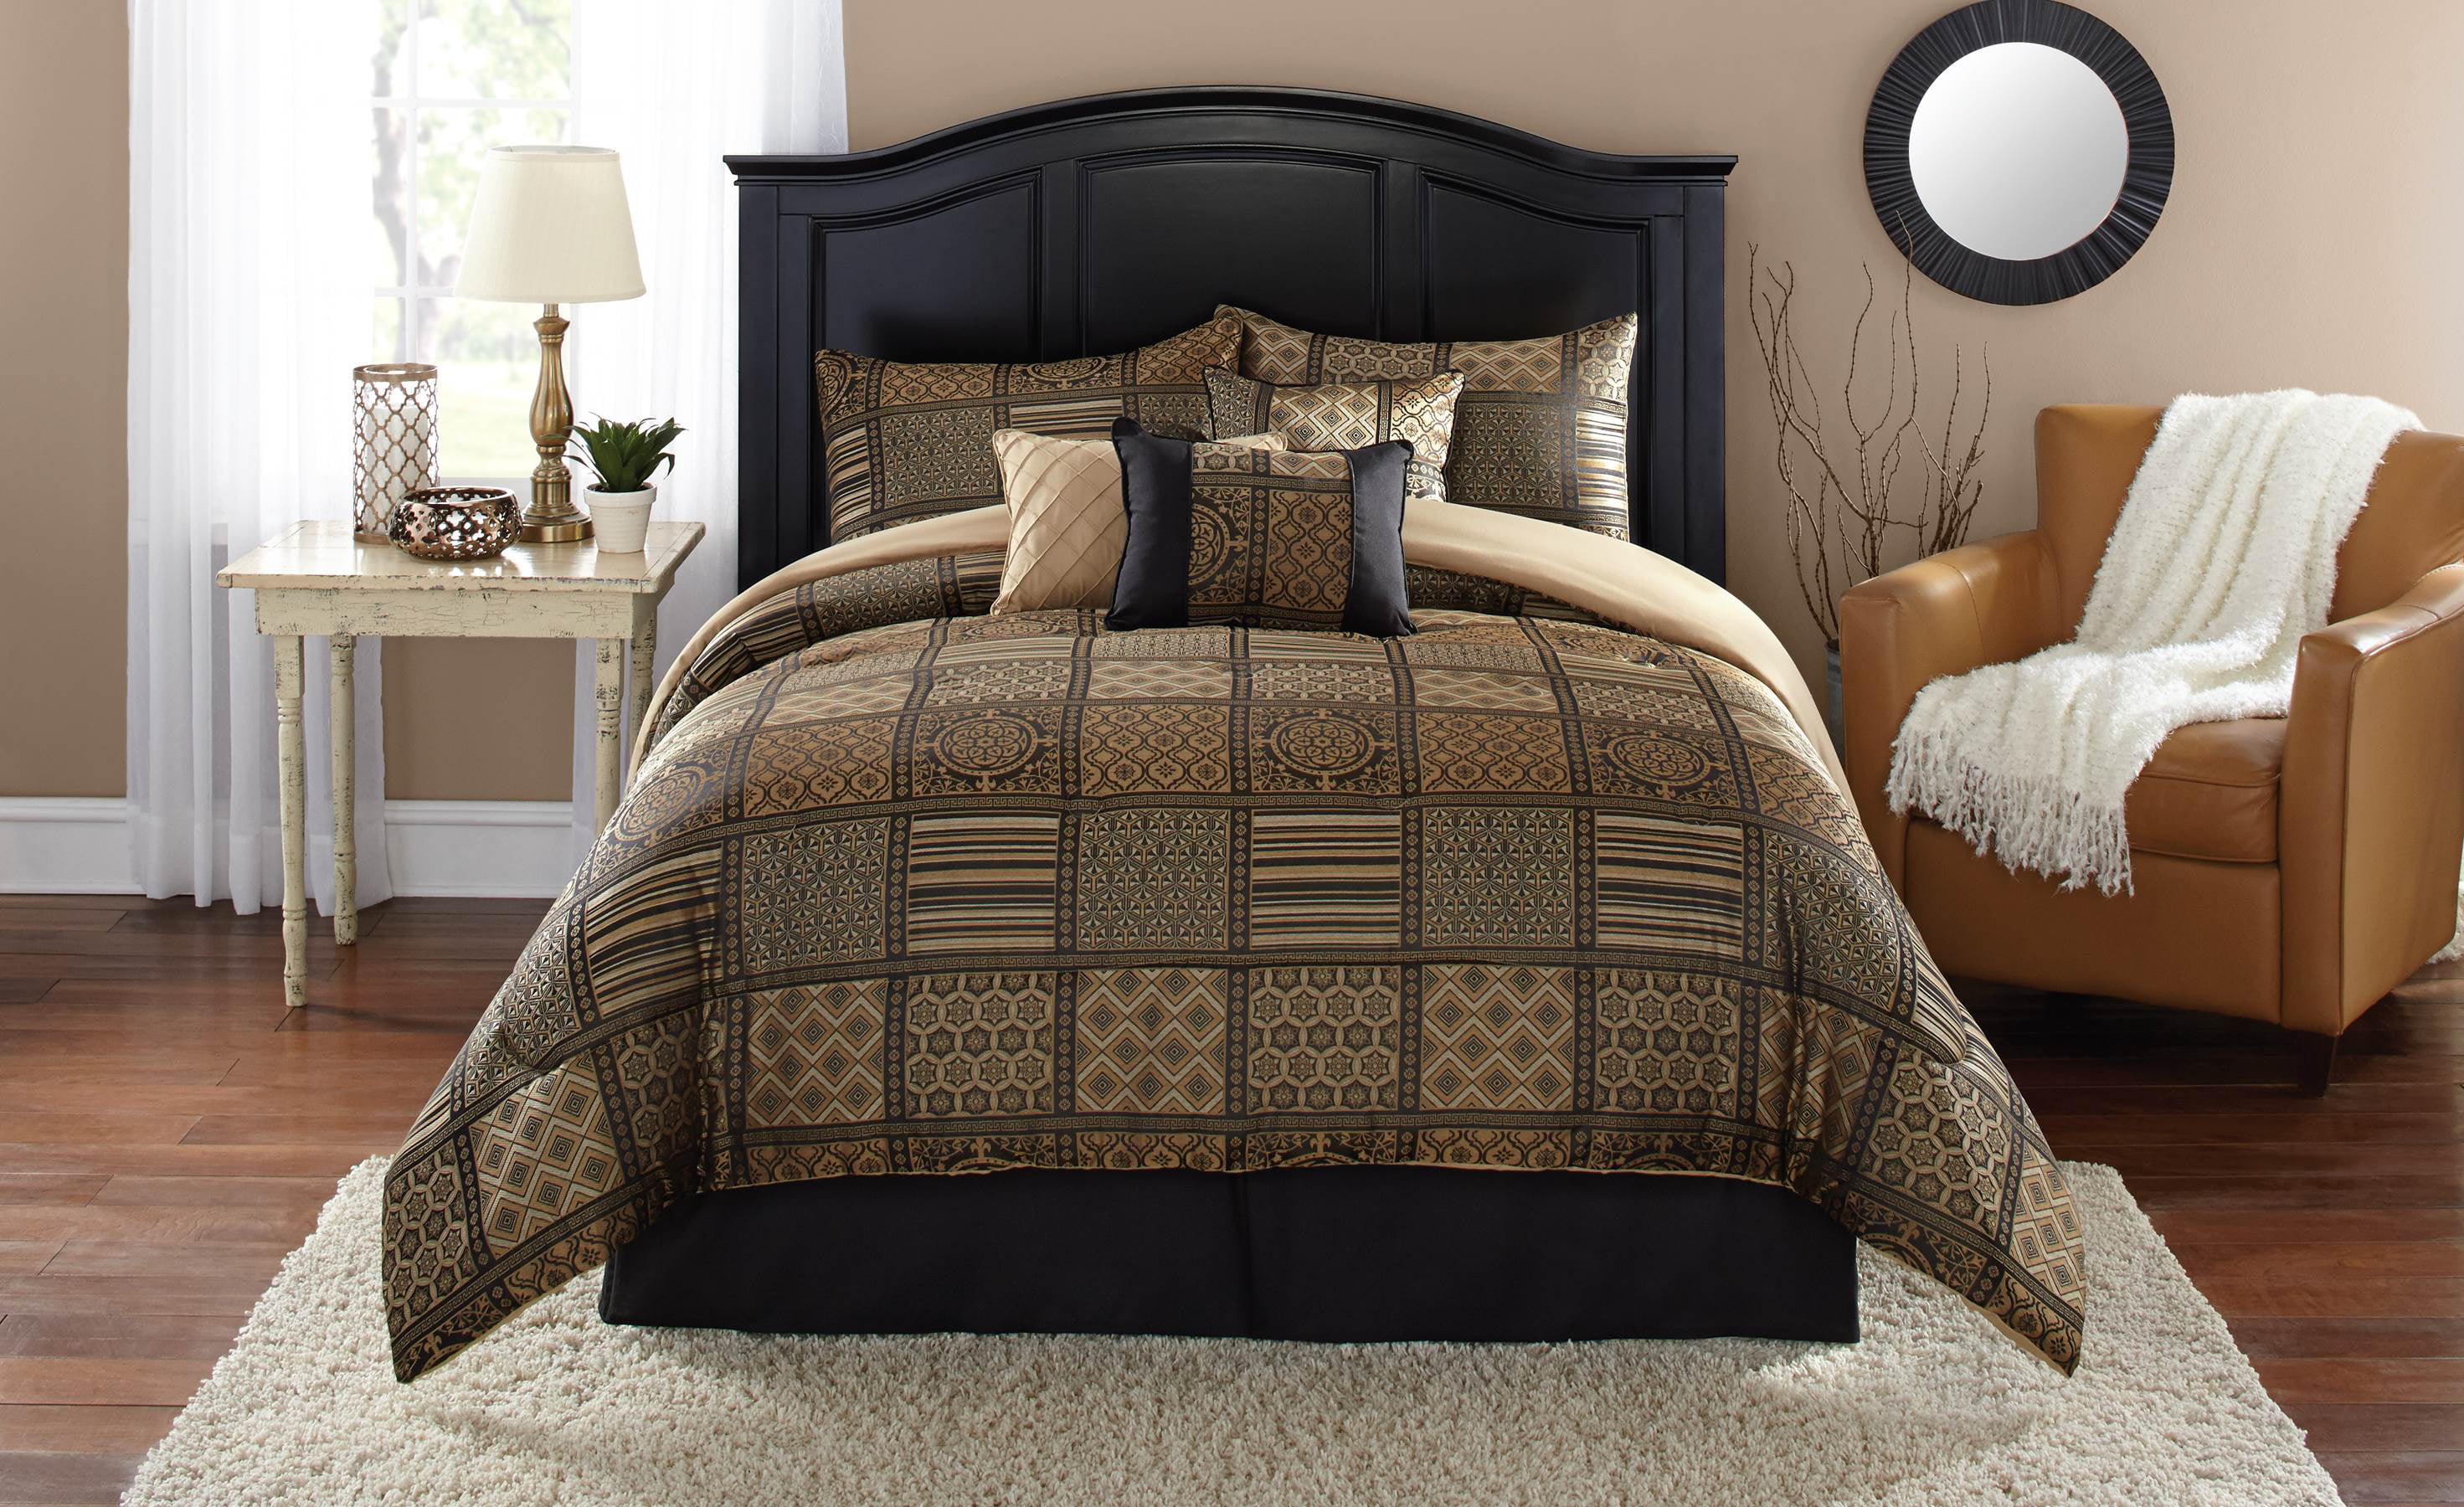 Black And Gold Comforter : Black Gray And Gold Color Swirl Comforter Or